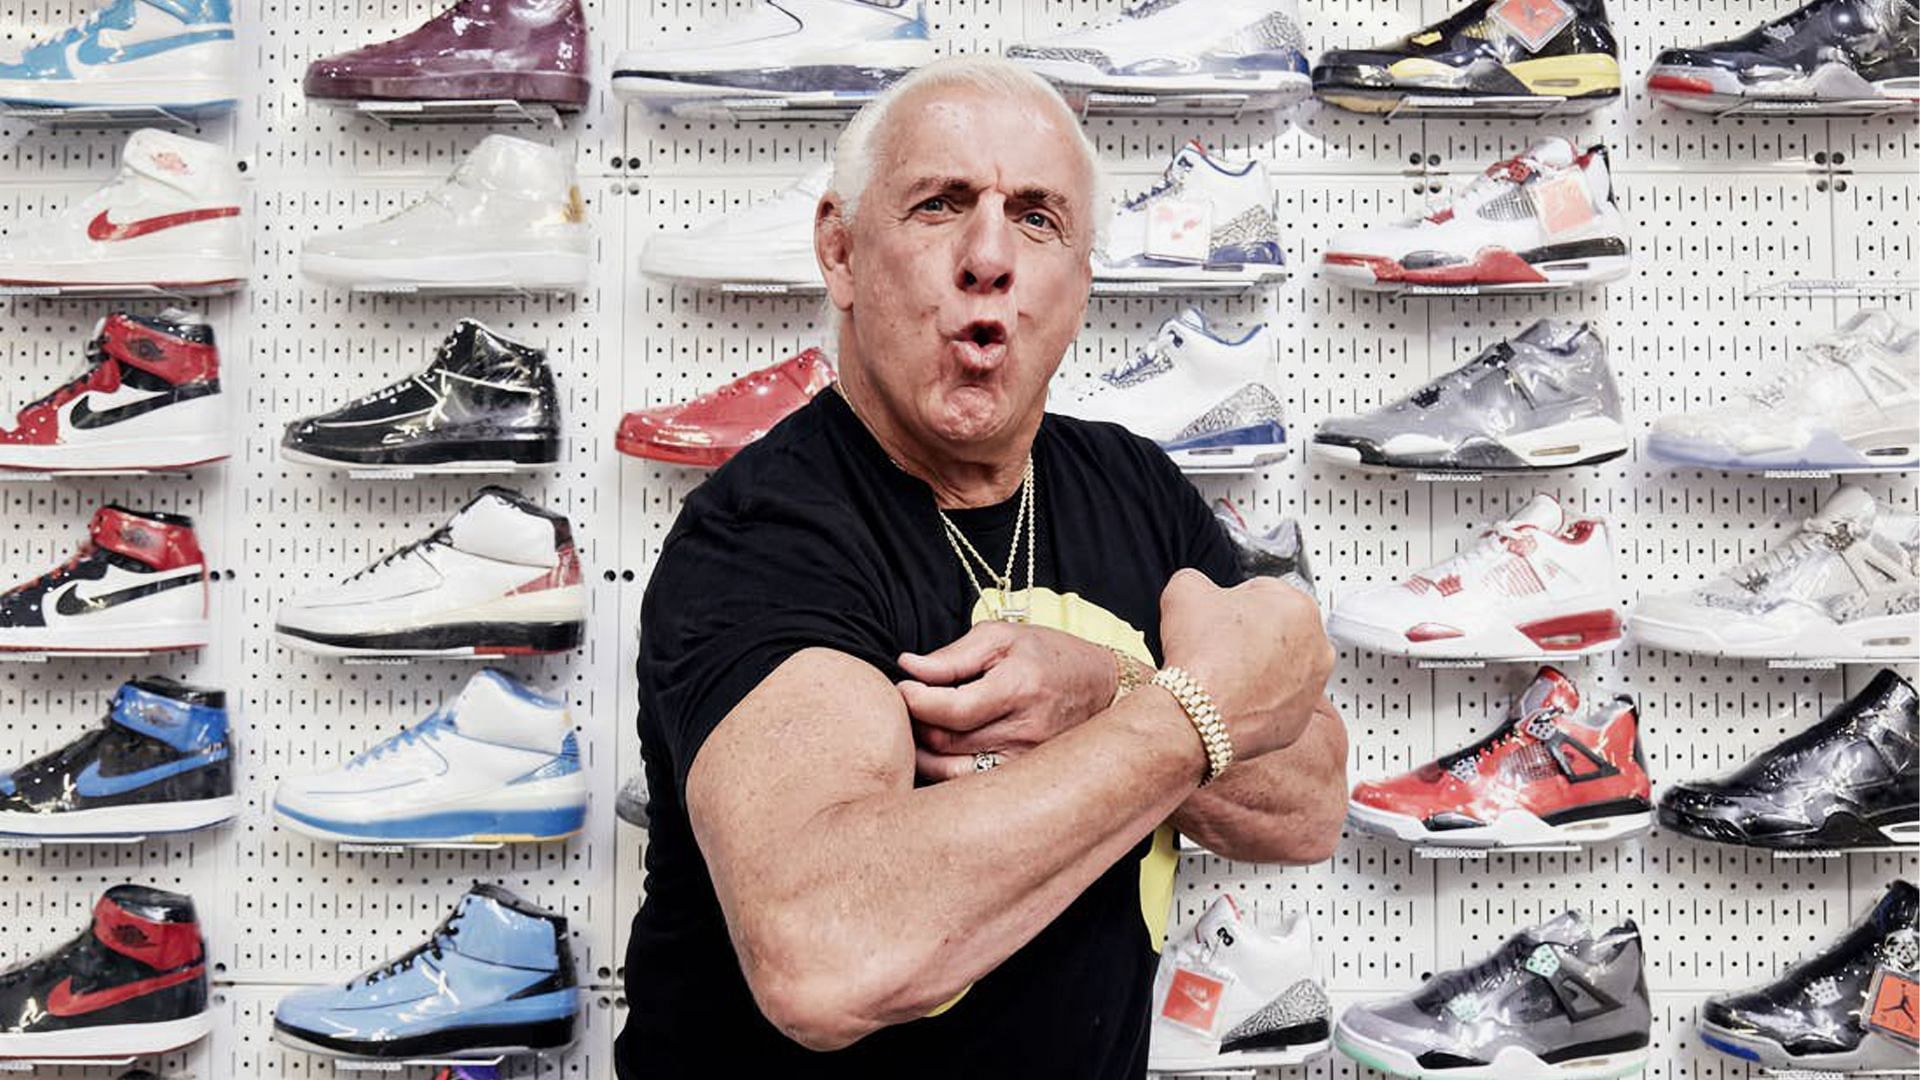 The Nature Boy poses in a sneaker shop (image credit: Ric Flair on X)